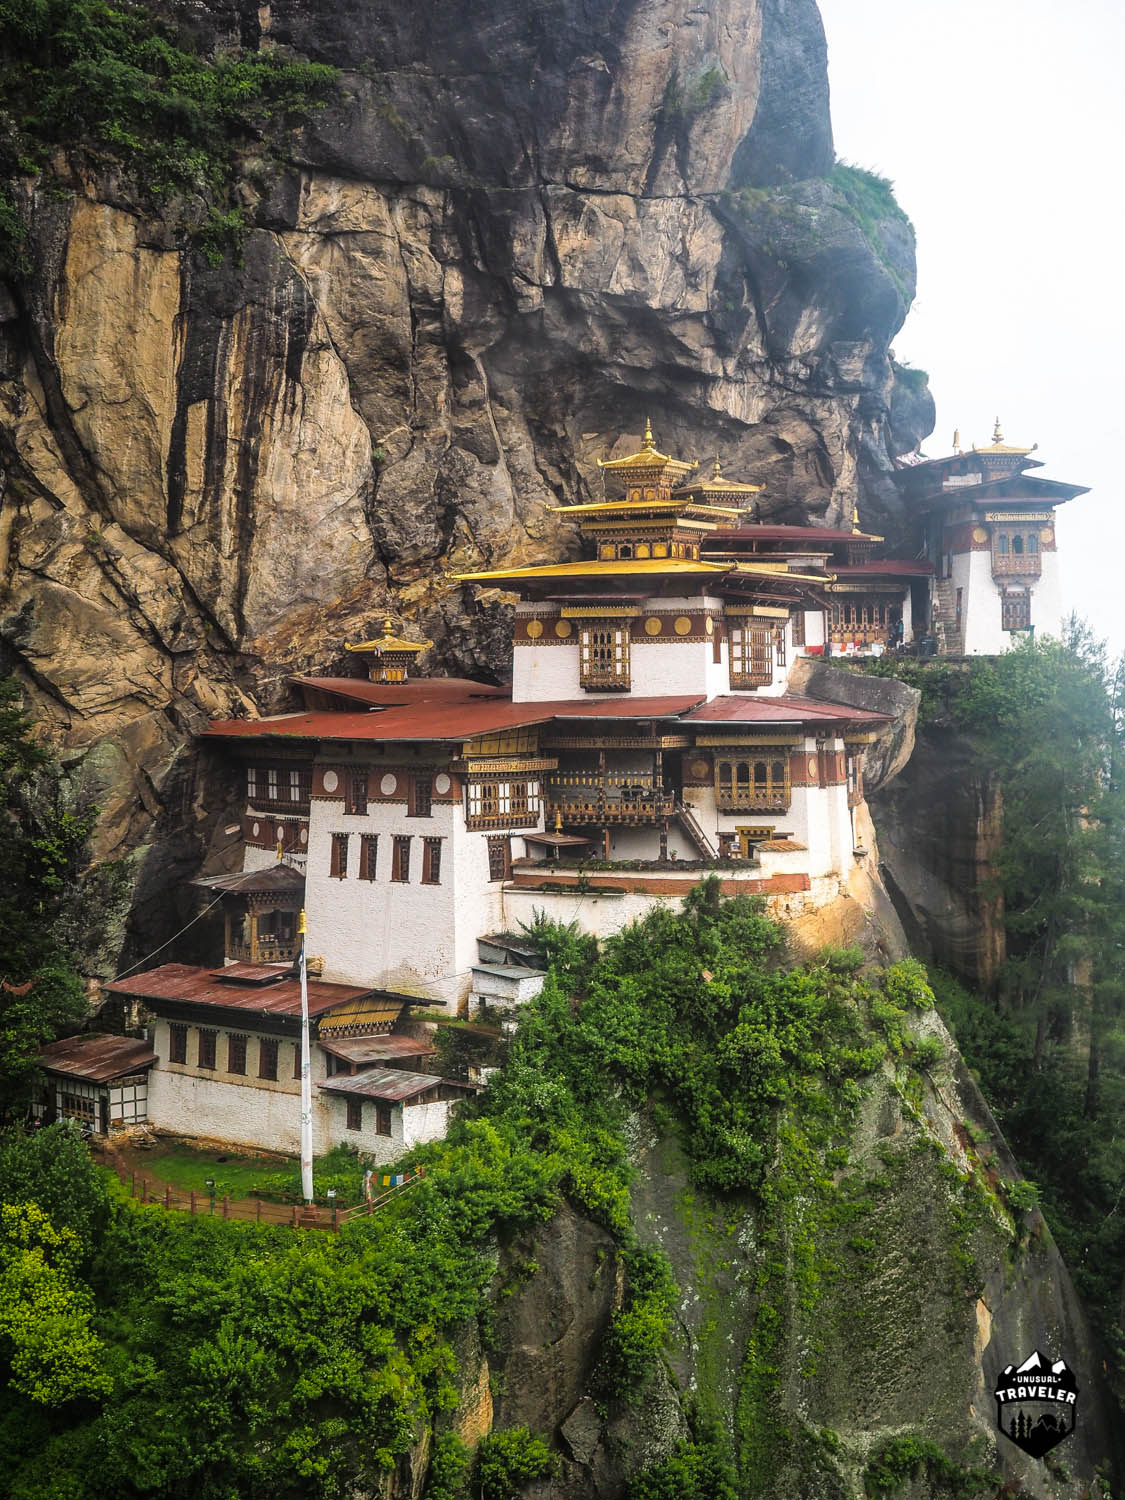 Taktsang Palphug Monastery (also known as Tiger's Nest) is the most stunning monastery anywhere in the world.